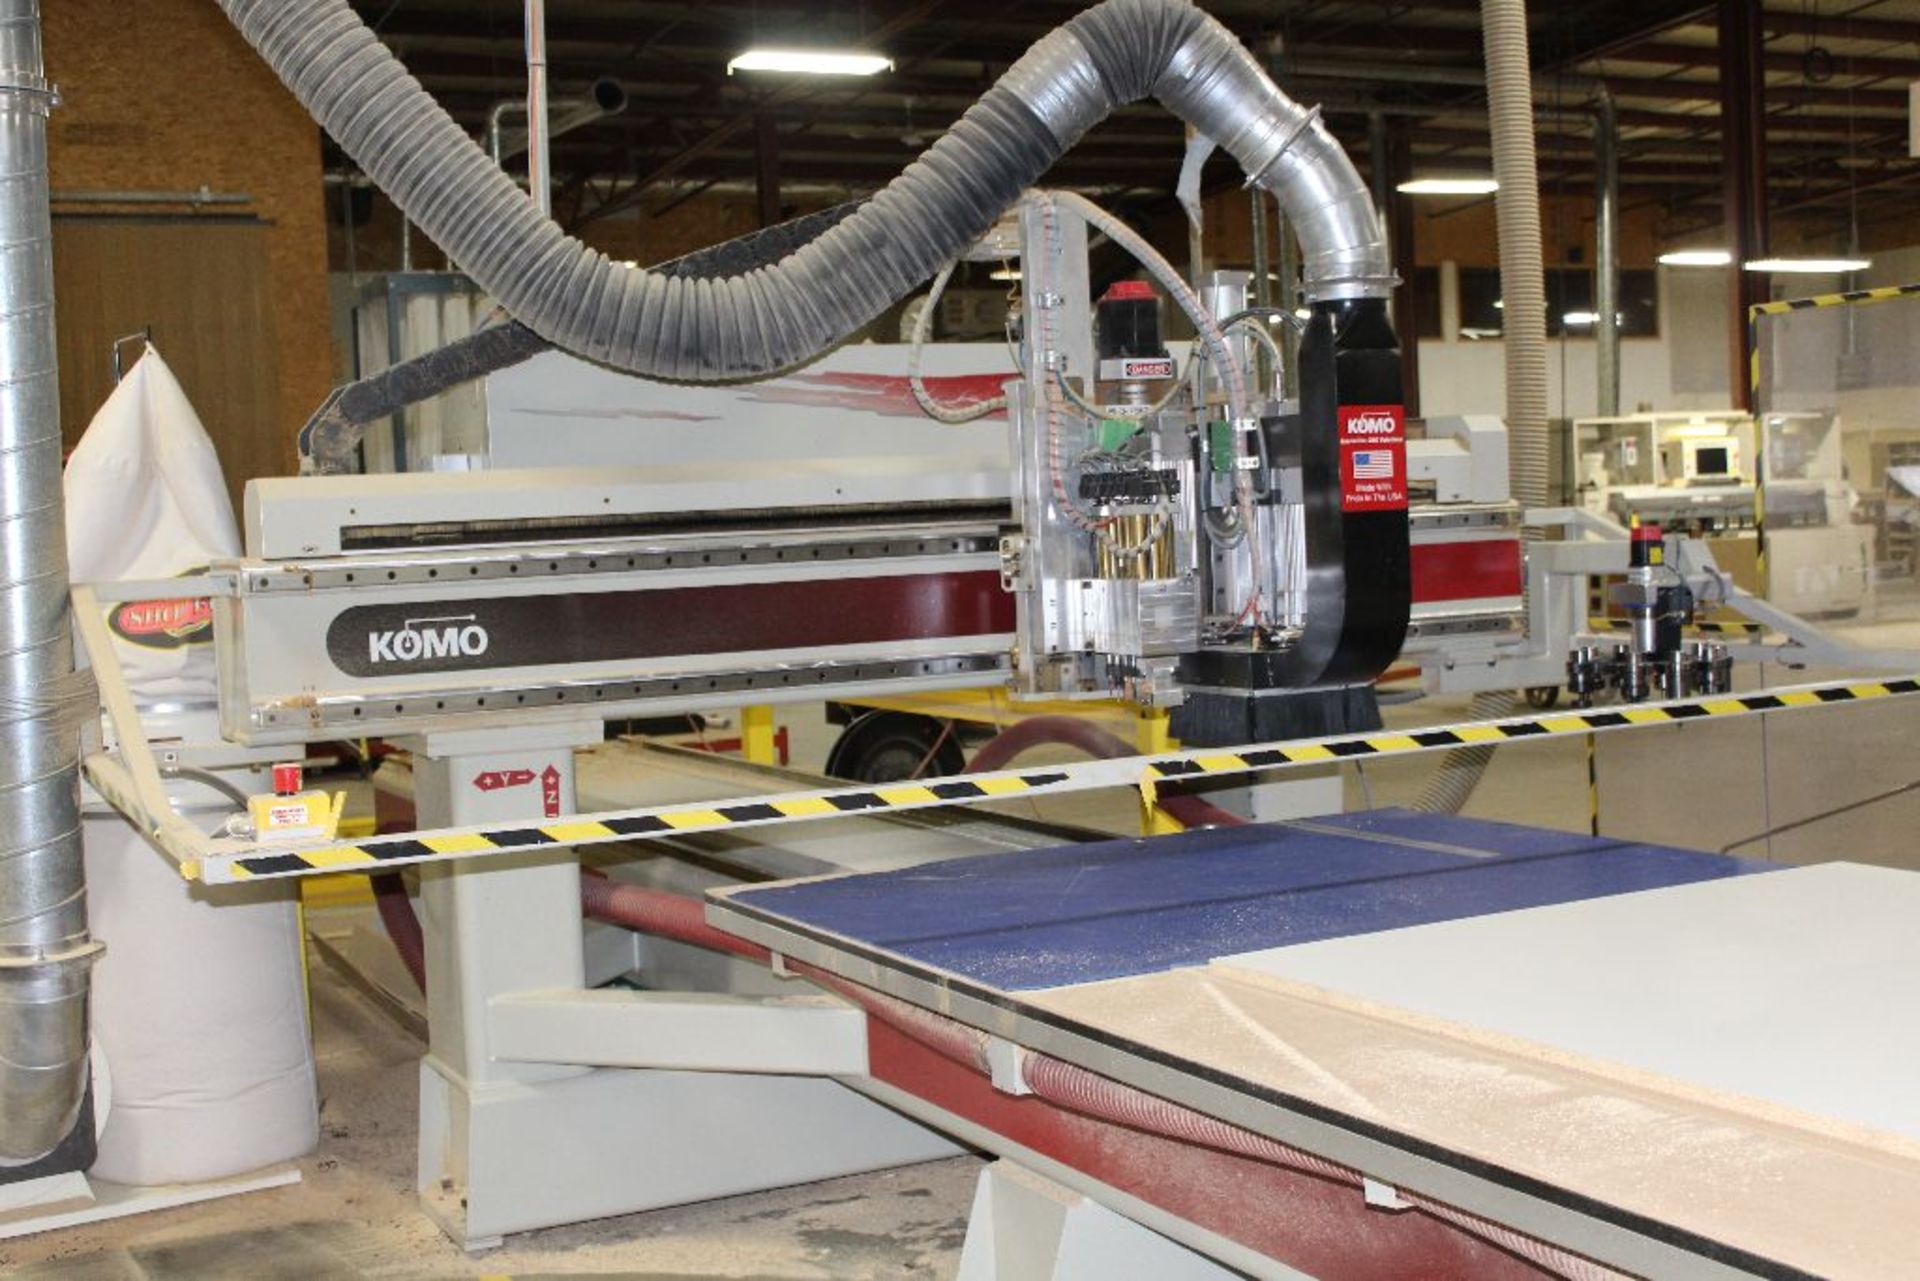 2006 Komo CNC router, model VR512, sn 57103-06, hrs. on CNC router 4,857, 5'x 12' table, 9